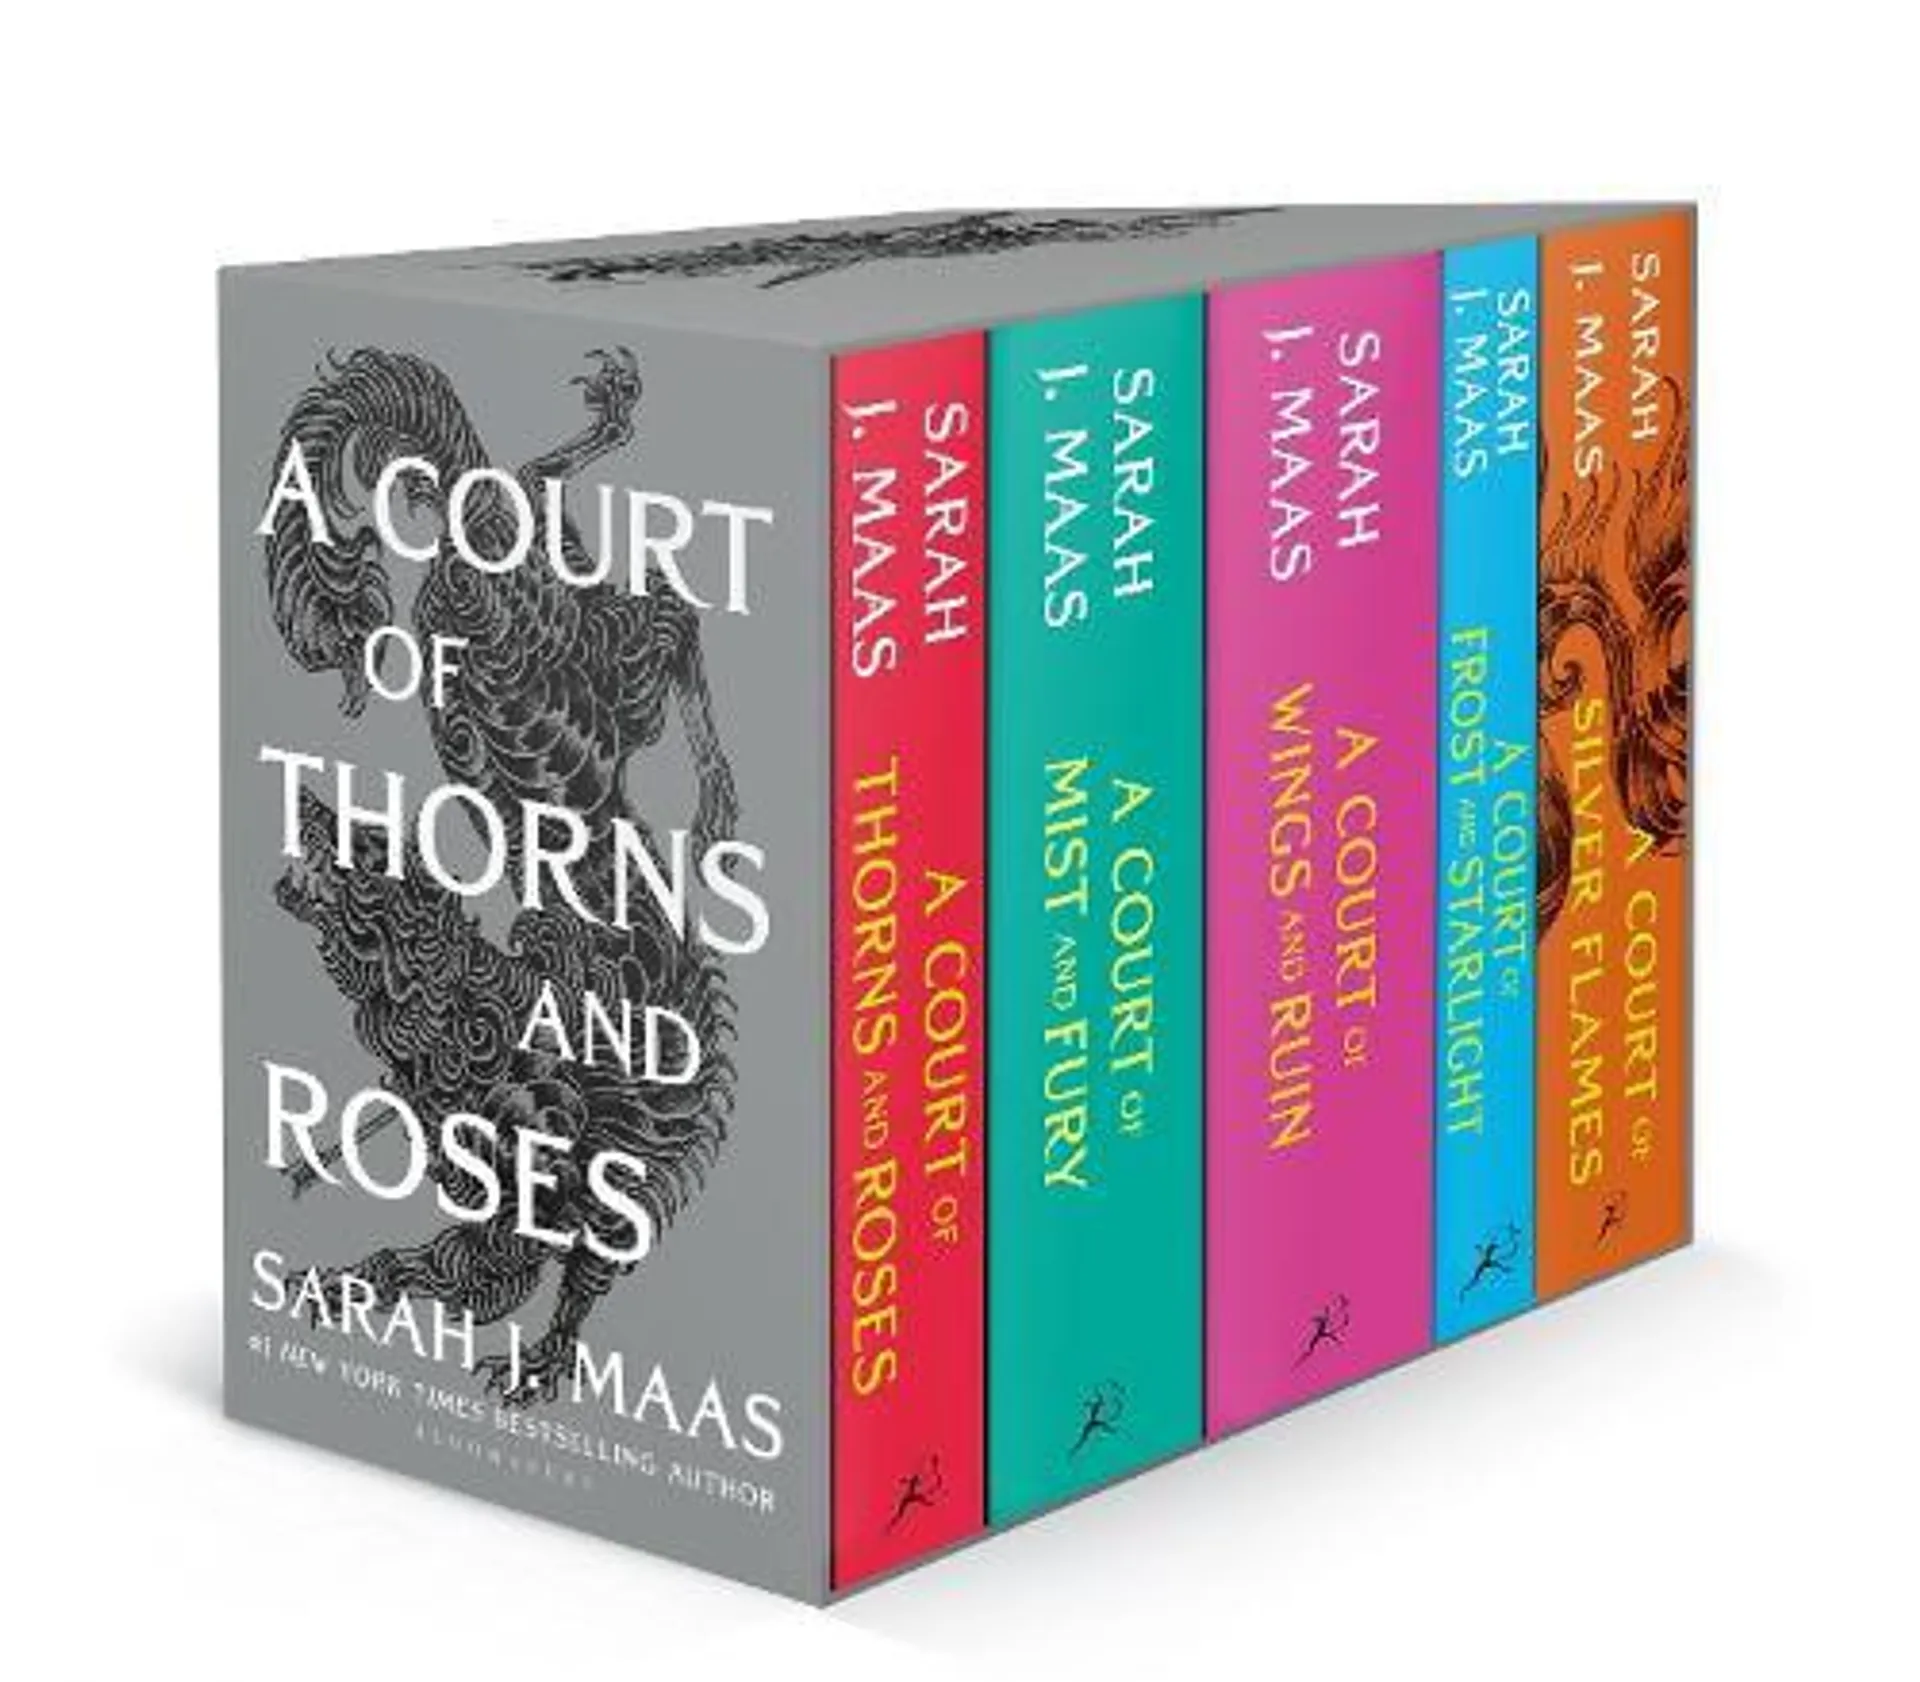 A Court of Thorns and Roses Paperback Box Set (5 books) - A Court of Thorns and Roses (Multiple items)